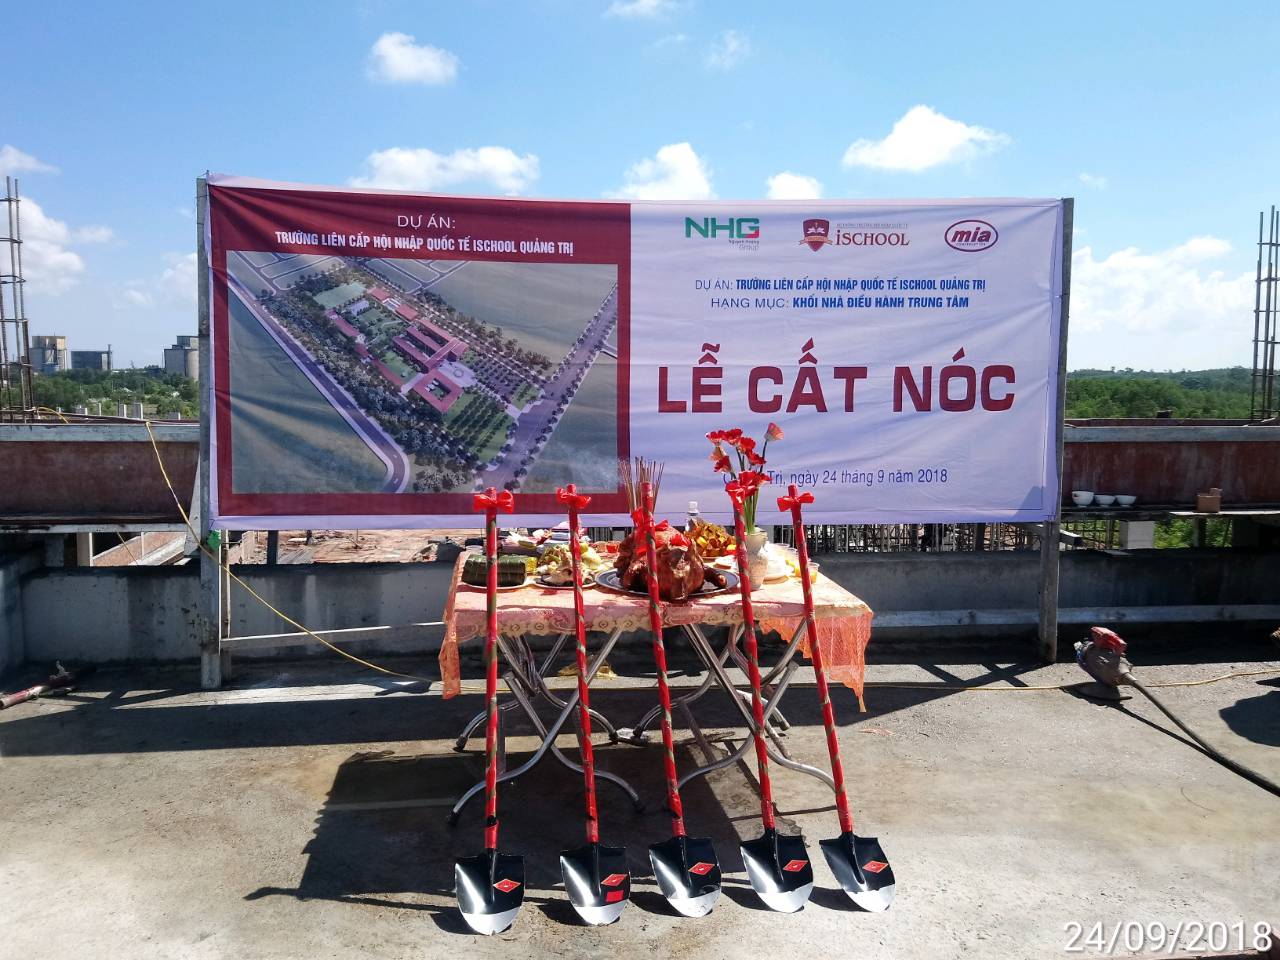 Roof-sealing Ceremony of the Center Admin Block of iSchool Quang Tri